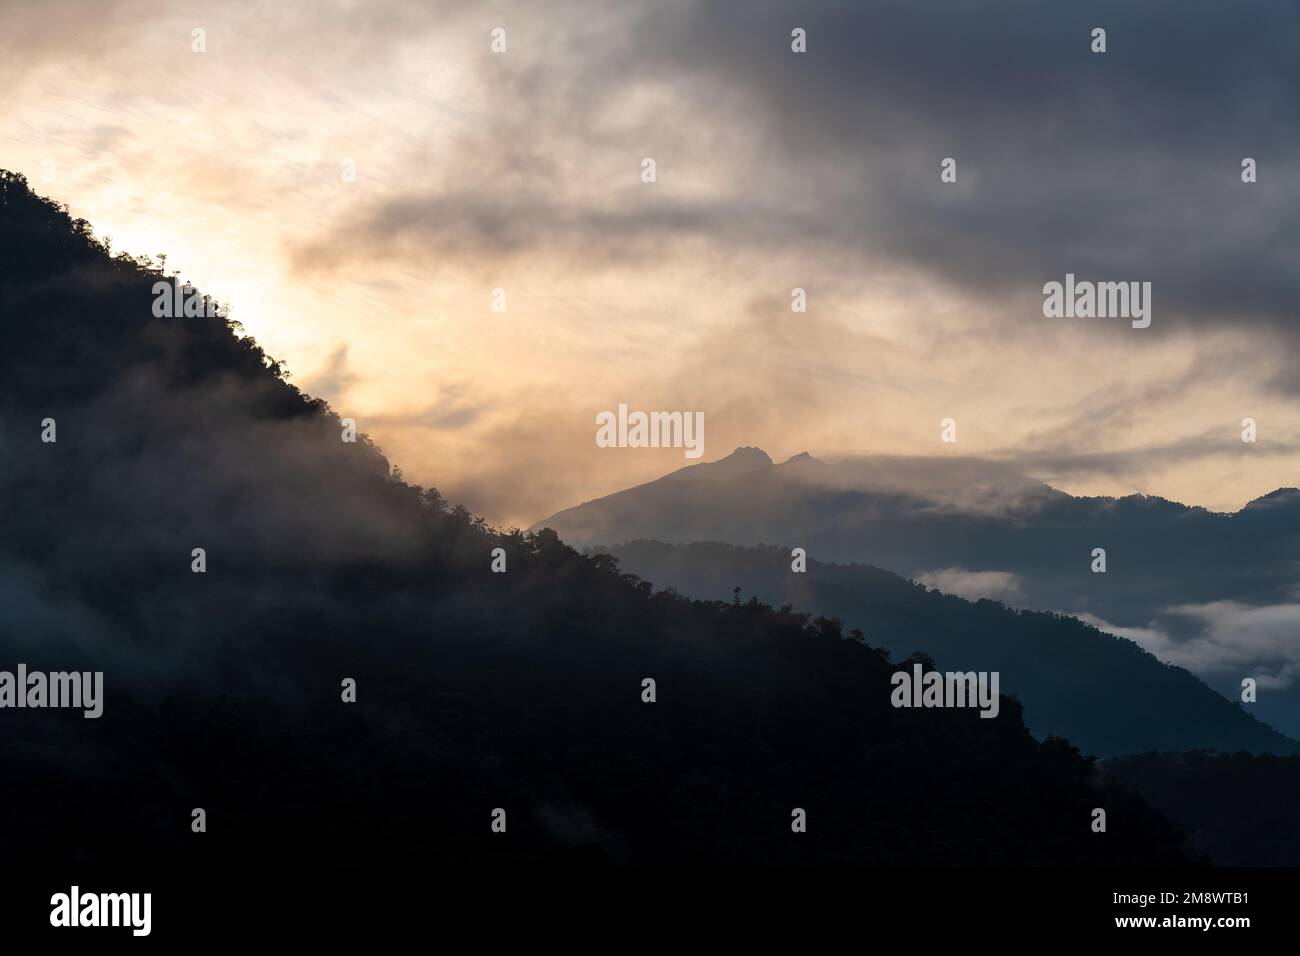 Cloud forest sunrise with Andes mountains in background, Mindo Tandayapa cloud forest, Quito region, Ecuador. Stock Photo